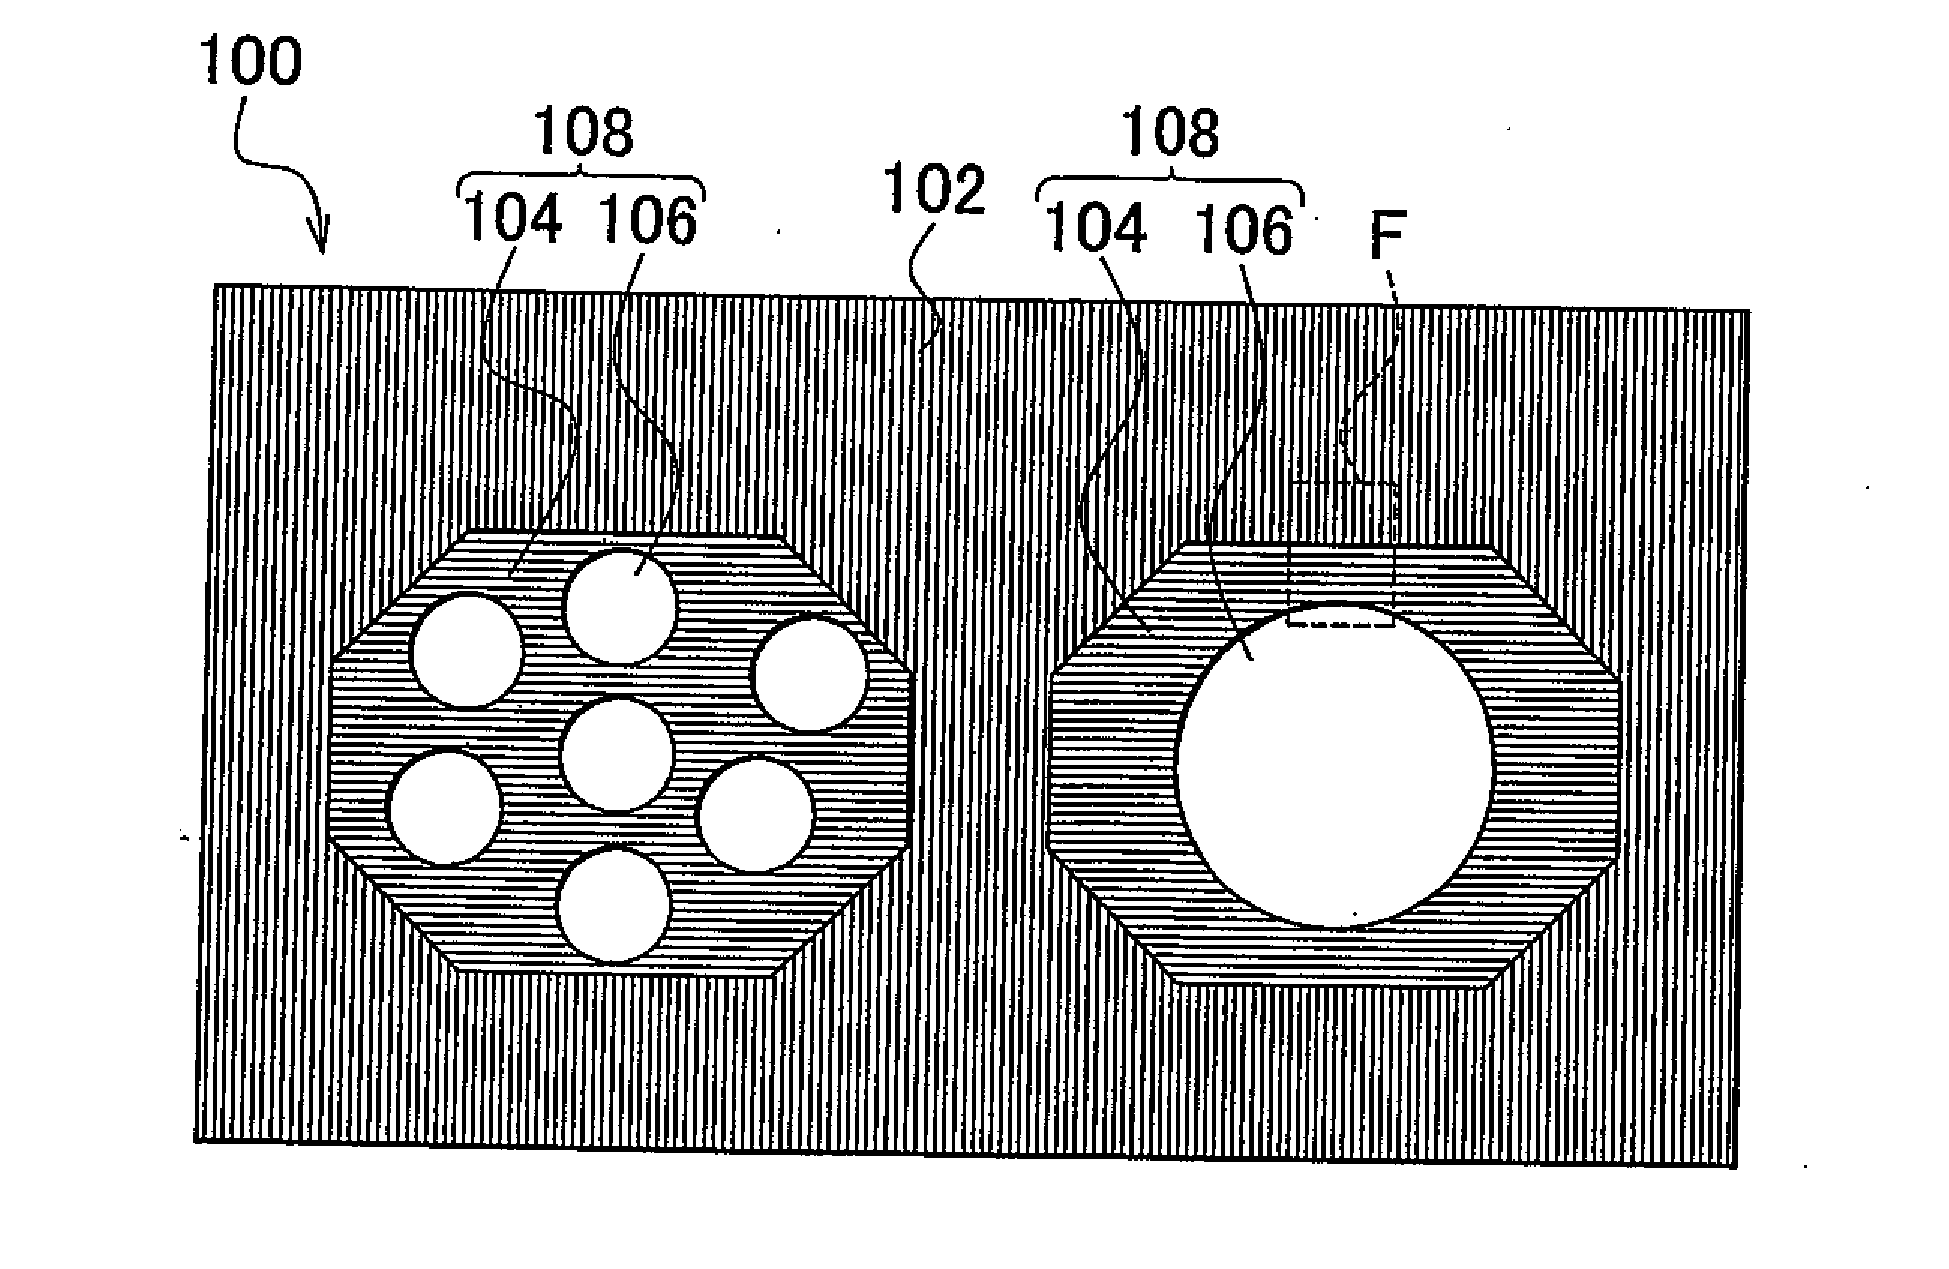 Nanocomposite thermoelectric conversion material and method of producing the same